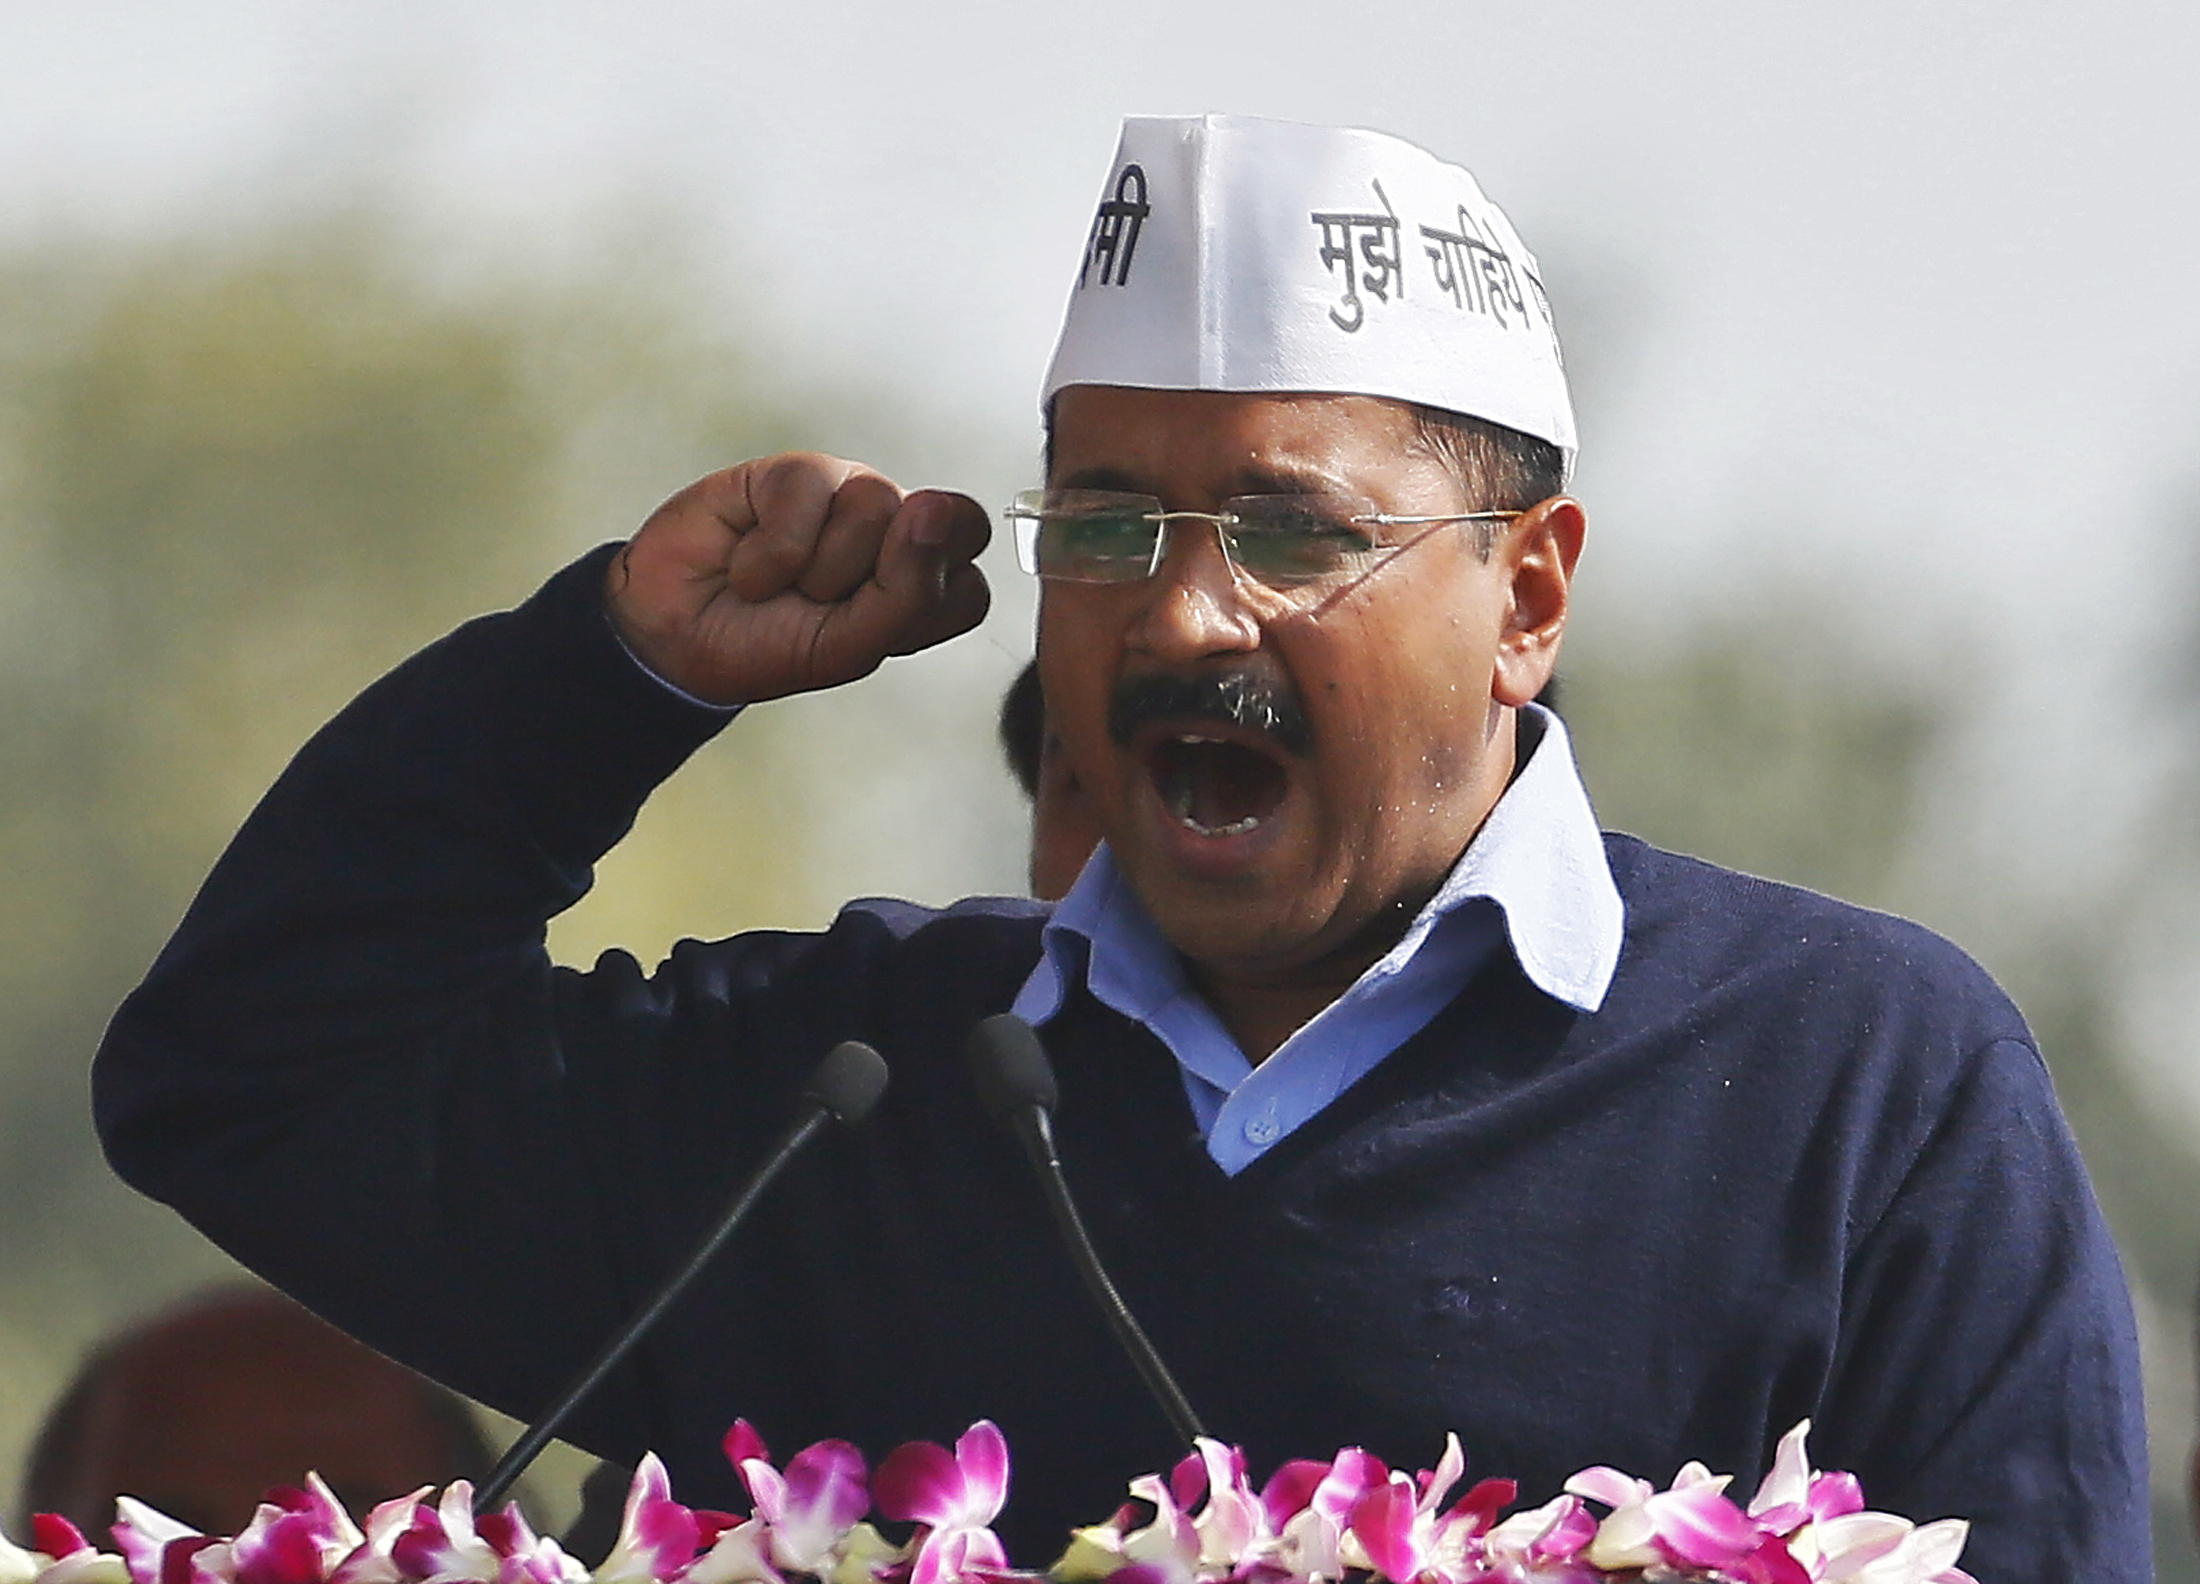 Kejriwal, chief of AAP, addresses his supporters after taking the oath as the new chief minister of Delhi during a swearing-in ceremony at Ramlila ground in New Delhi